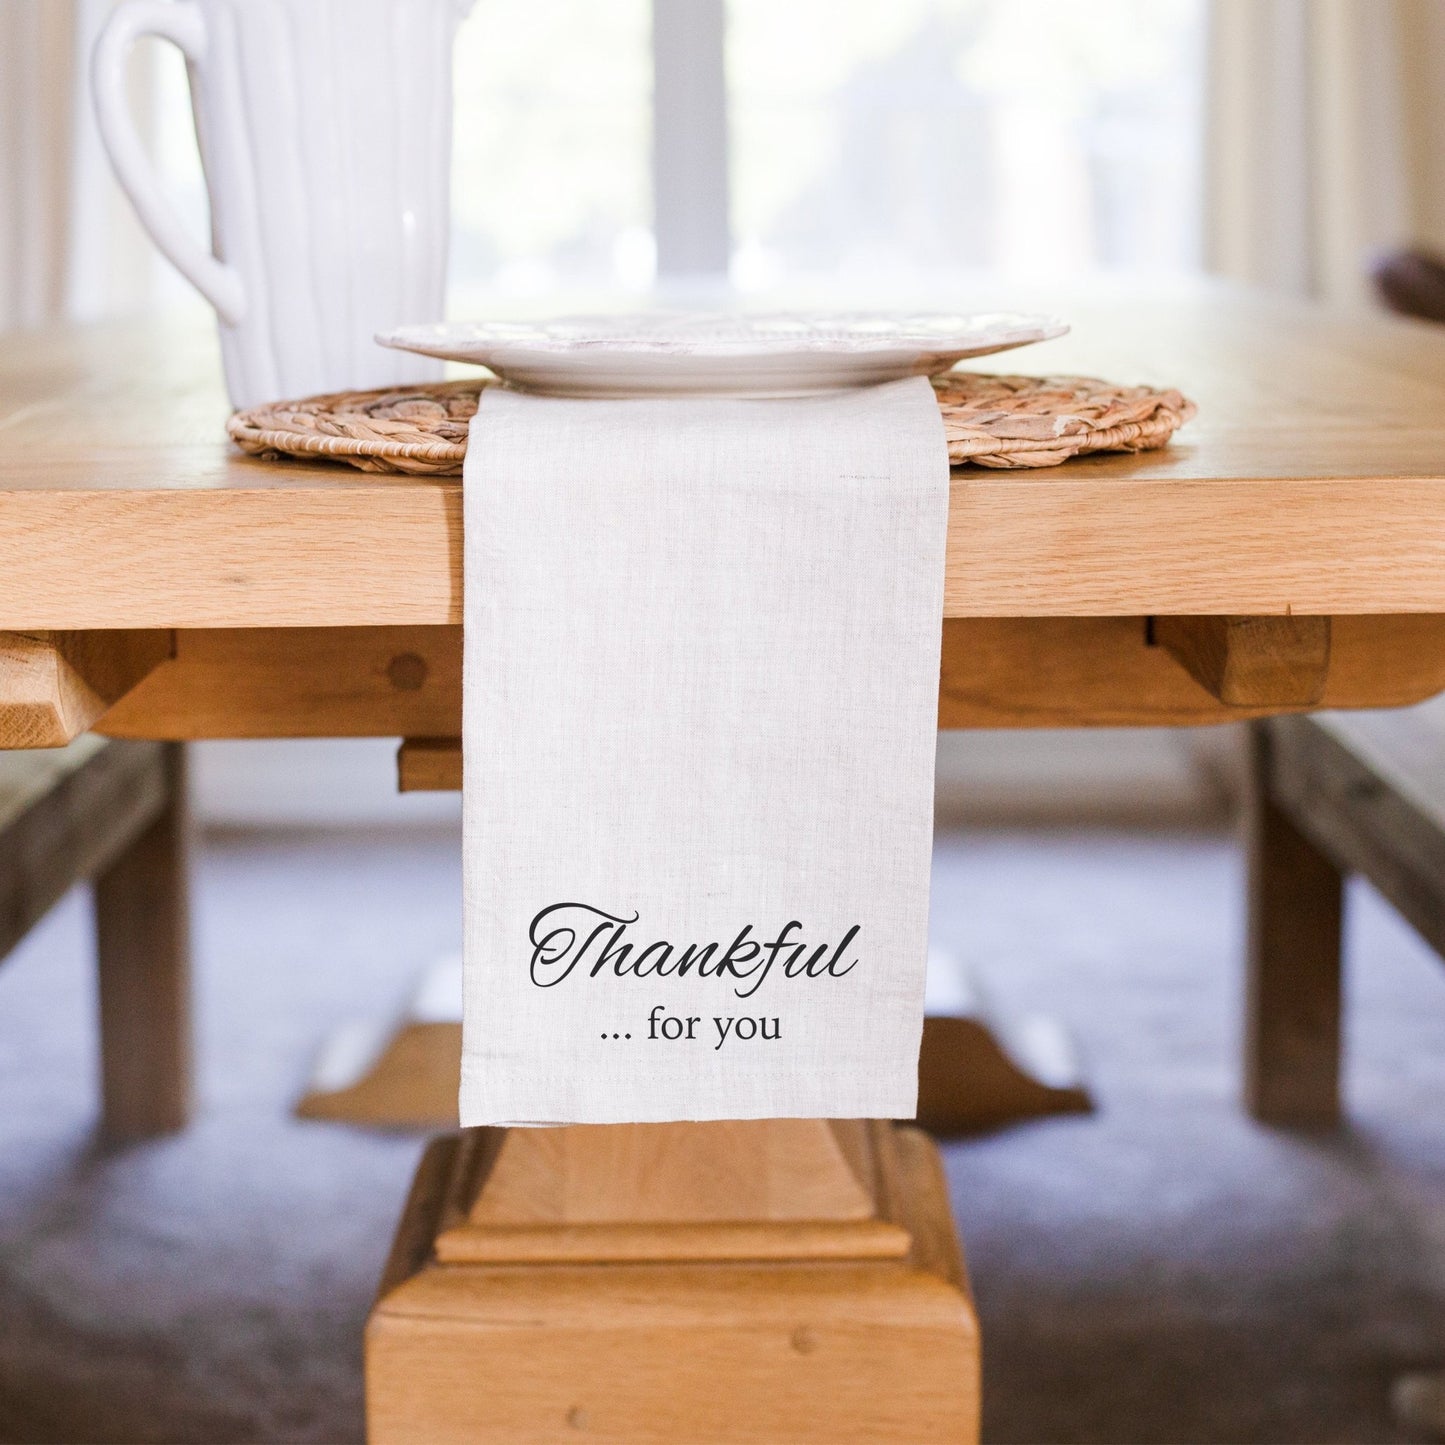 Load image into Gallery viewer, Thankful For You 100% Linen Napkin Set of 2 | Holiday Table Decor | Cloth Napkins | Eco-Friendly Napkins | Thanksgiving Christmas Decor - Sweet Hooligans Design
